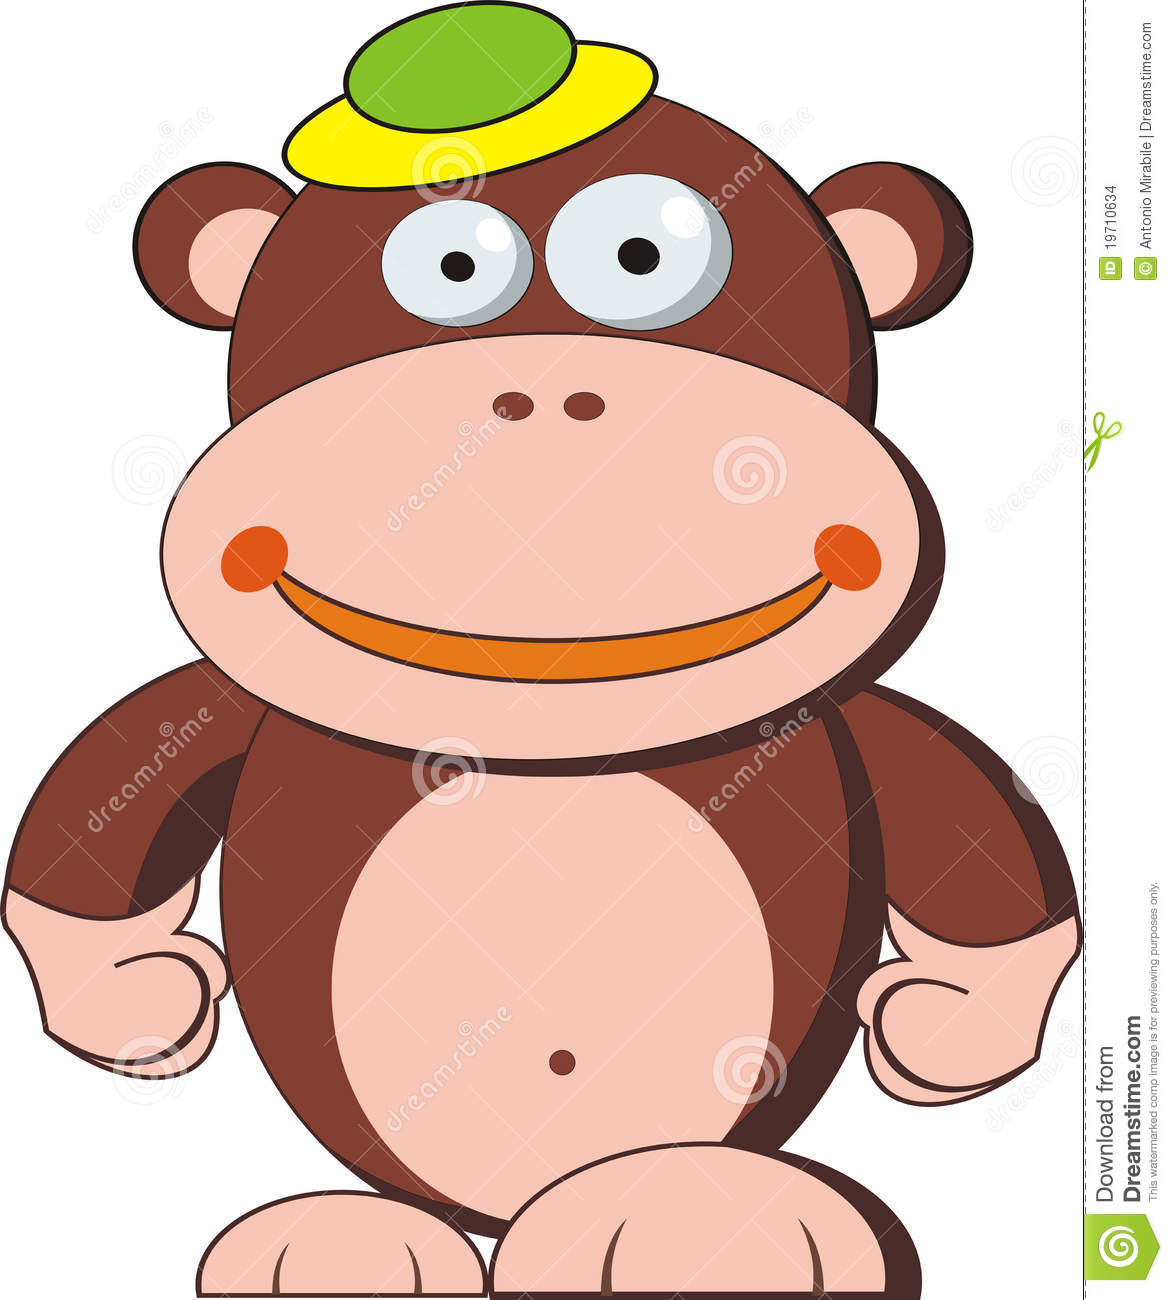 Funny Cartoon Monkey Pictures